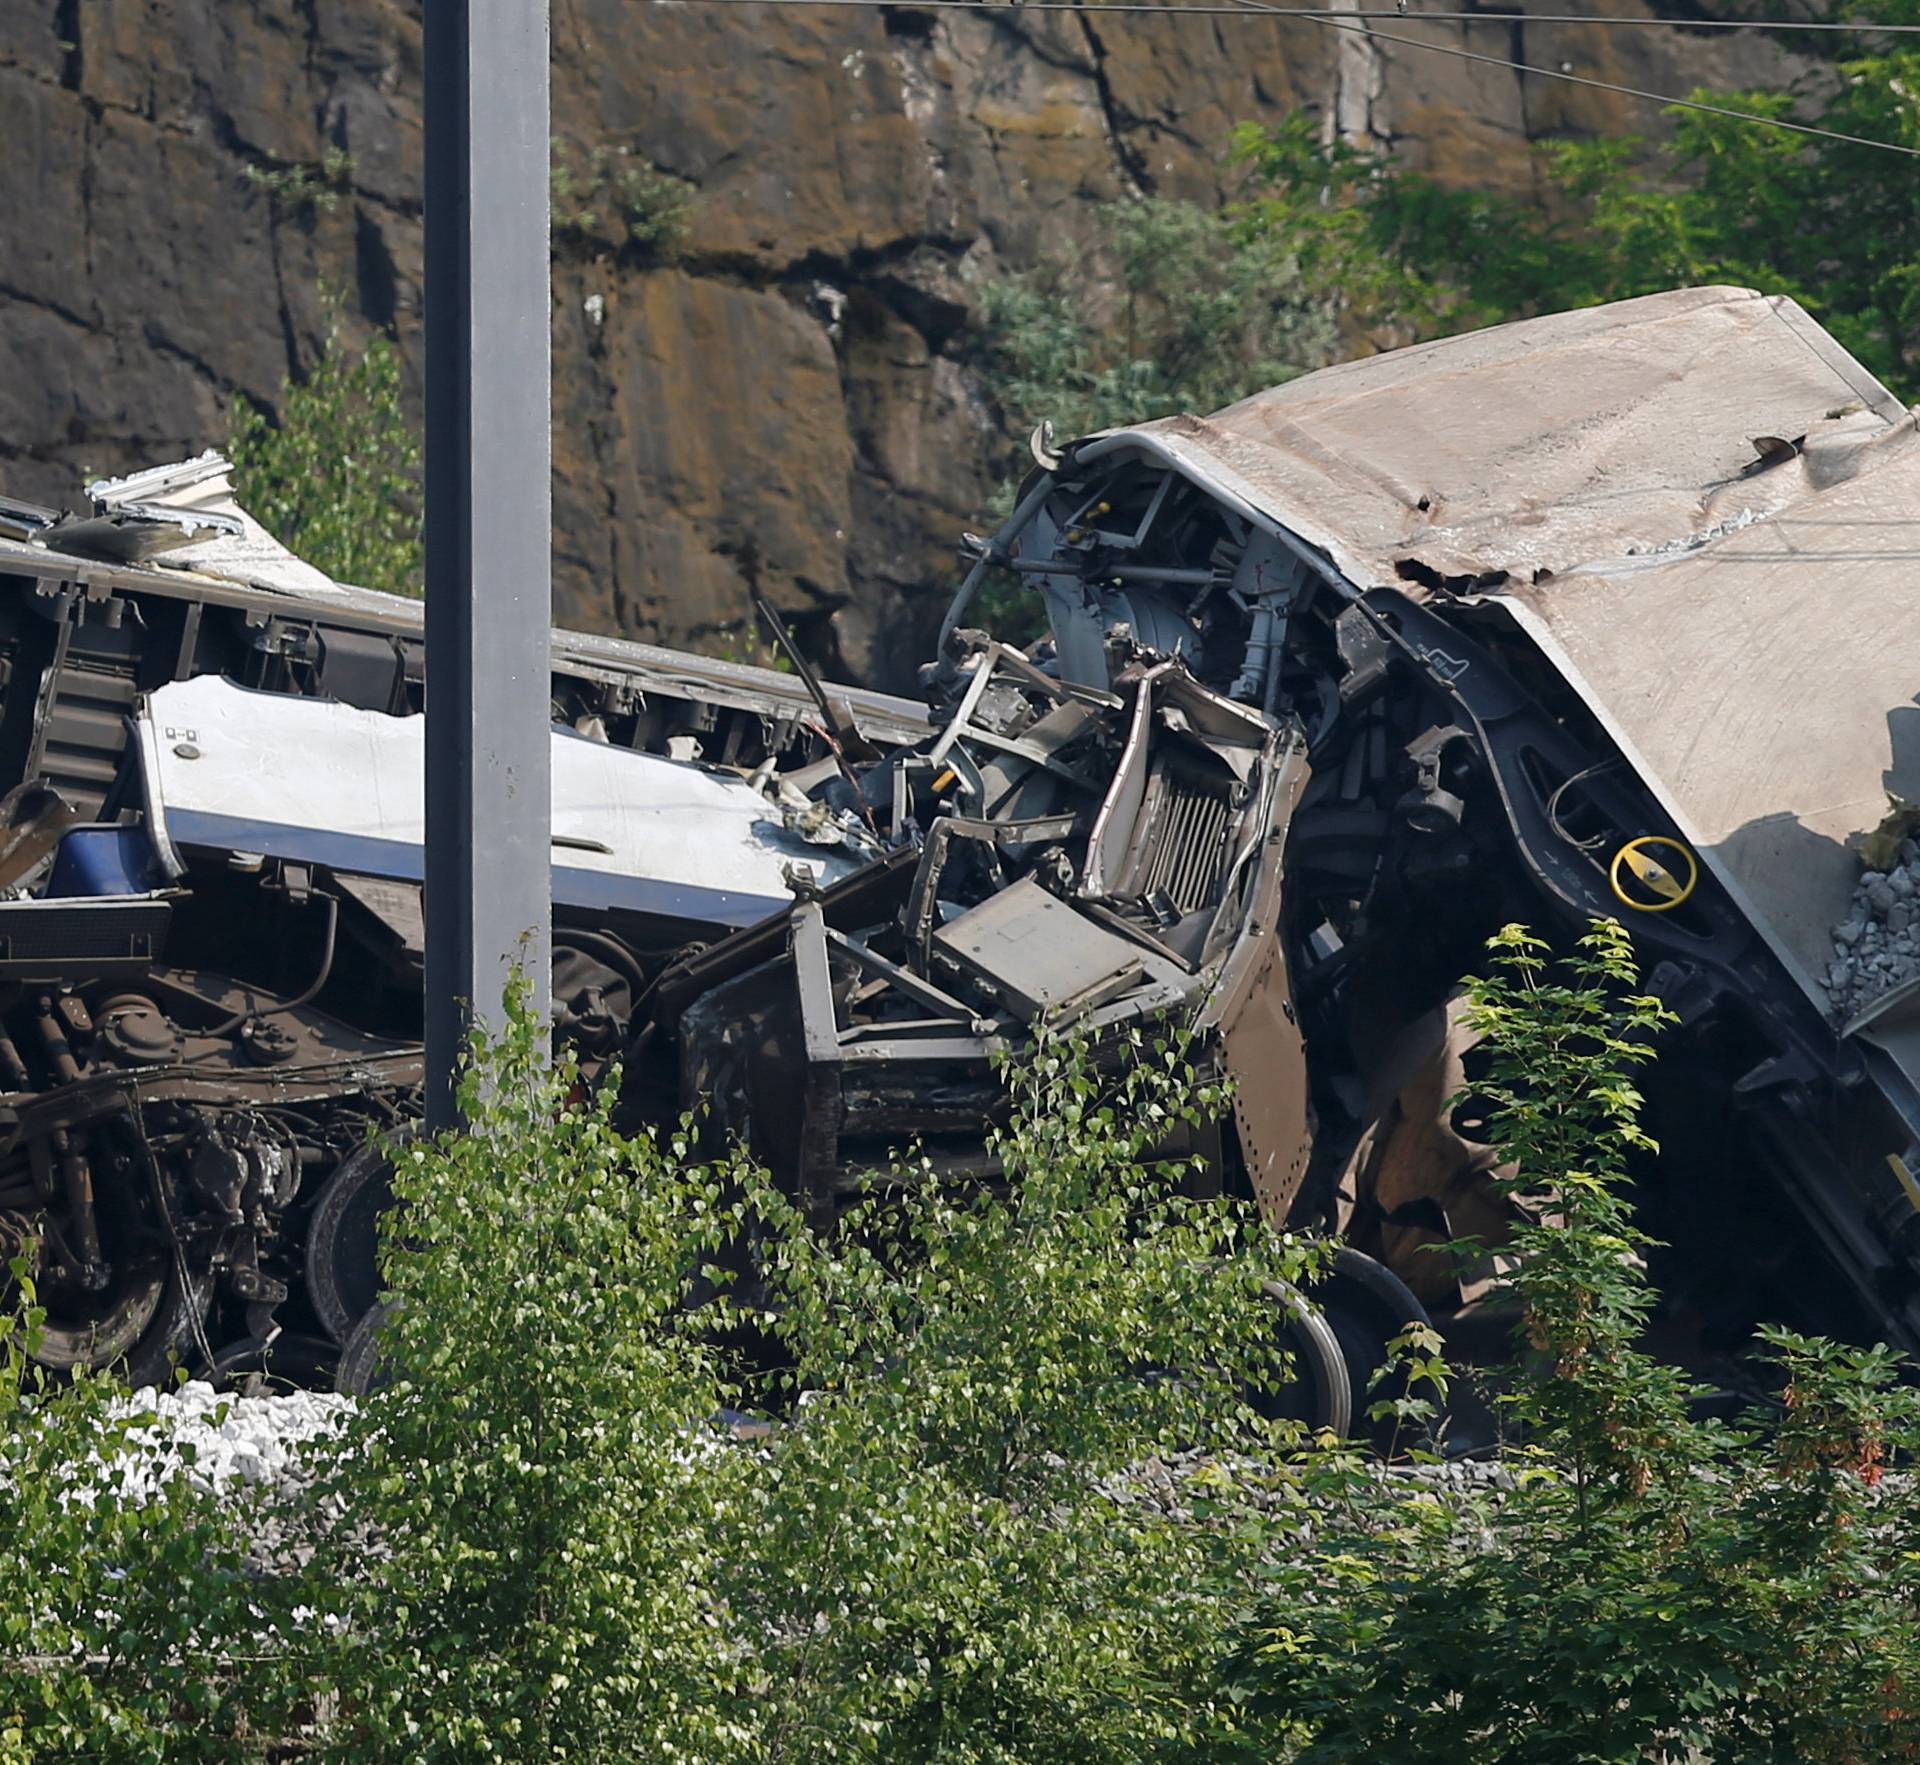 The wreckage of a passenger train is pictured after it crashed into the back of a freight train in the eastern Belgian municipality of Saint-Georges-Sur-Meuse